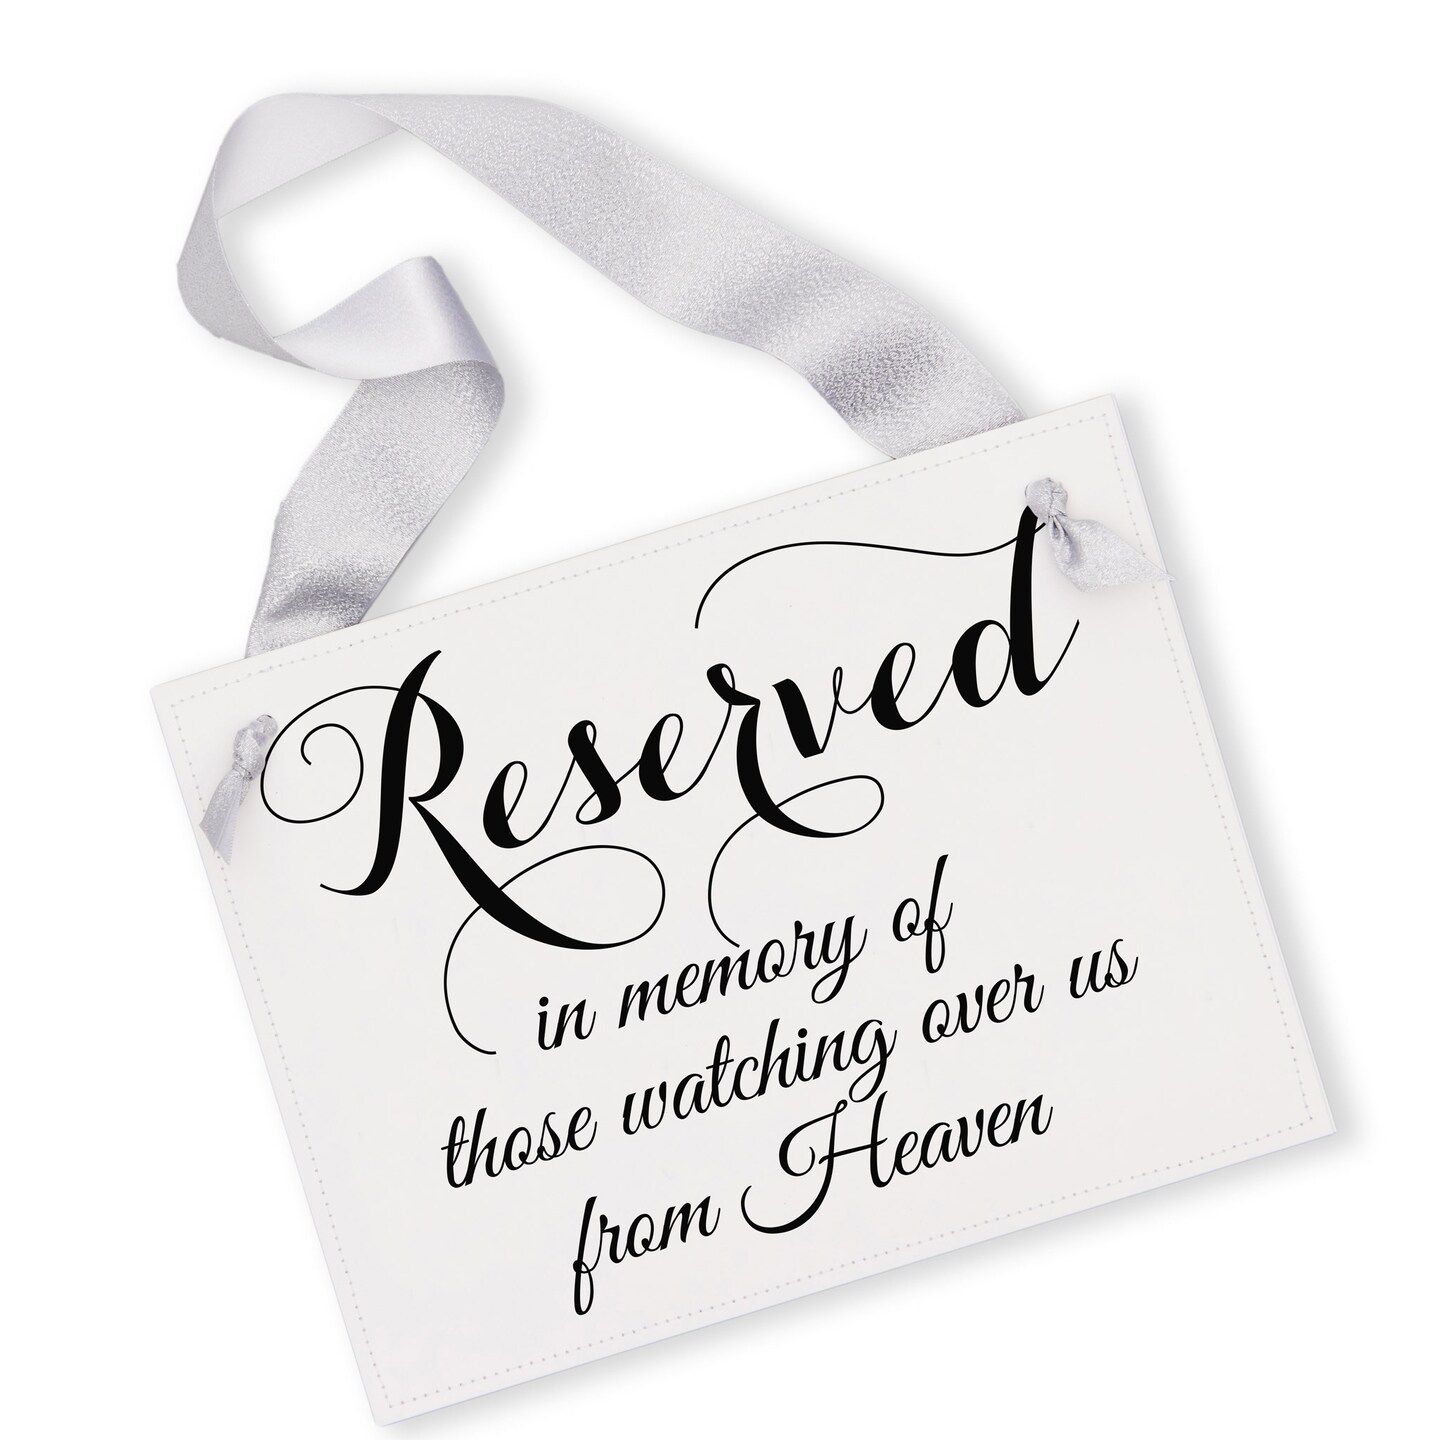 Ritzy Rose Memorial Chair Sign - Black on 11x8in White Linen Cardstock with Metallic Silver Ribbon